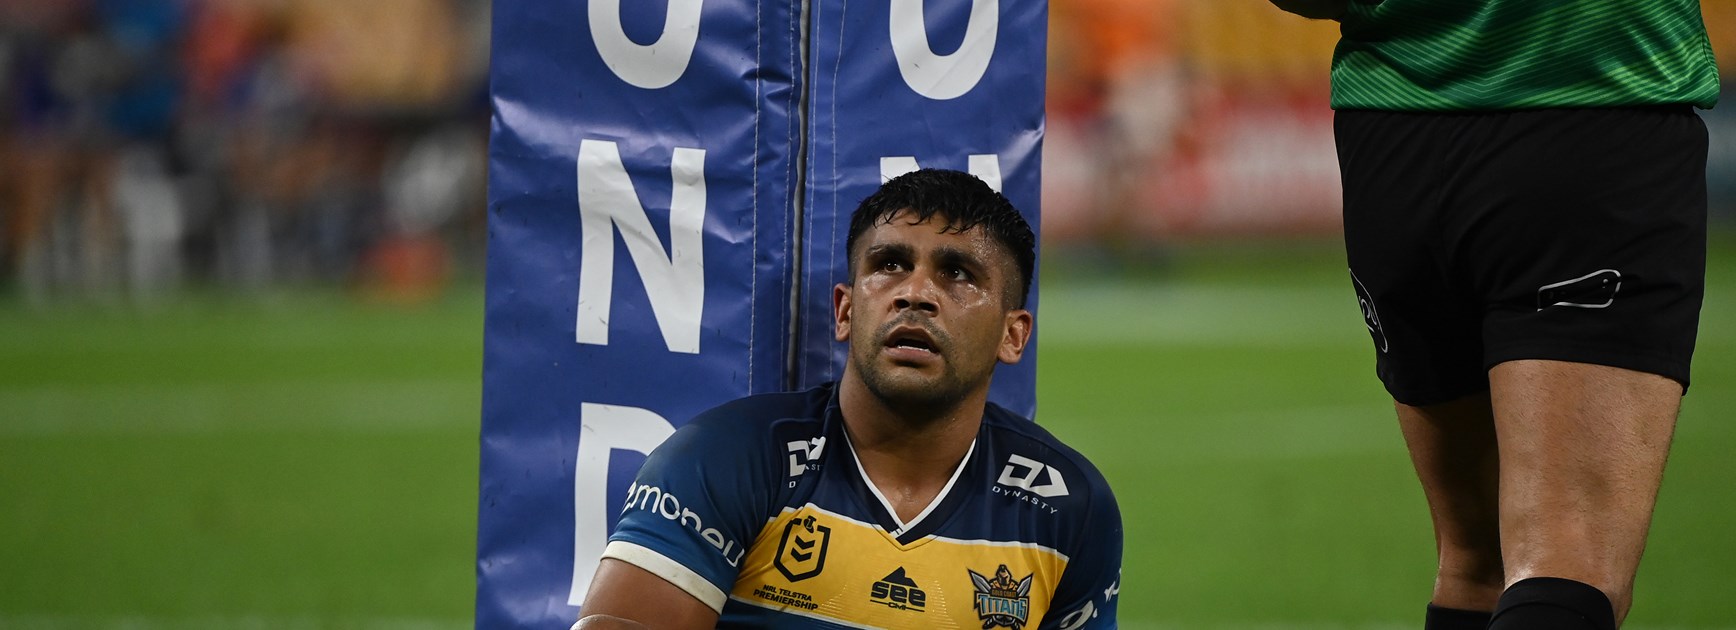 Peachey charged by Match Review Committee